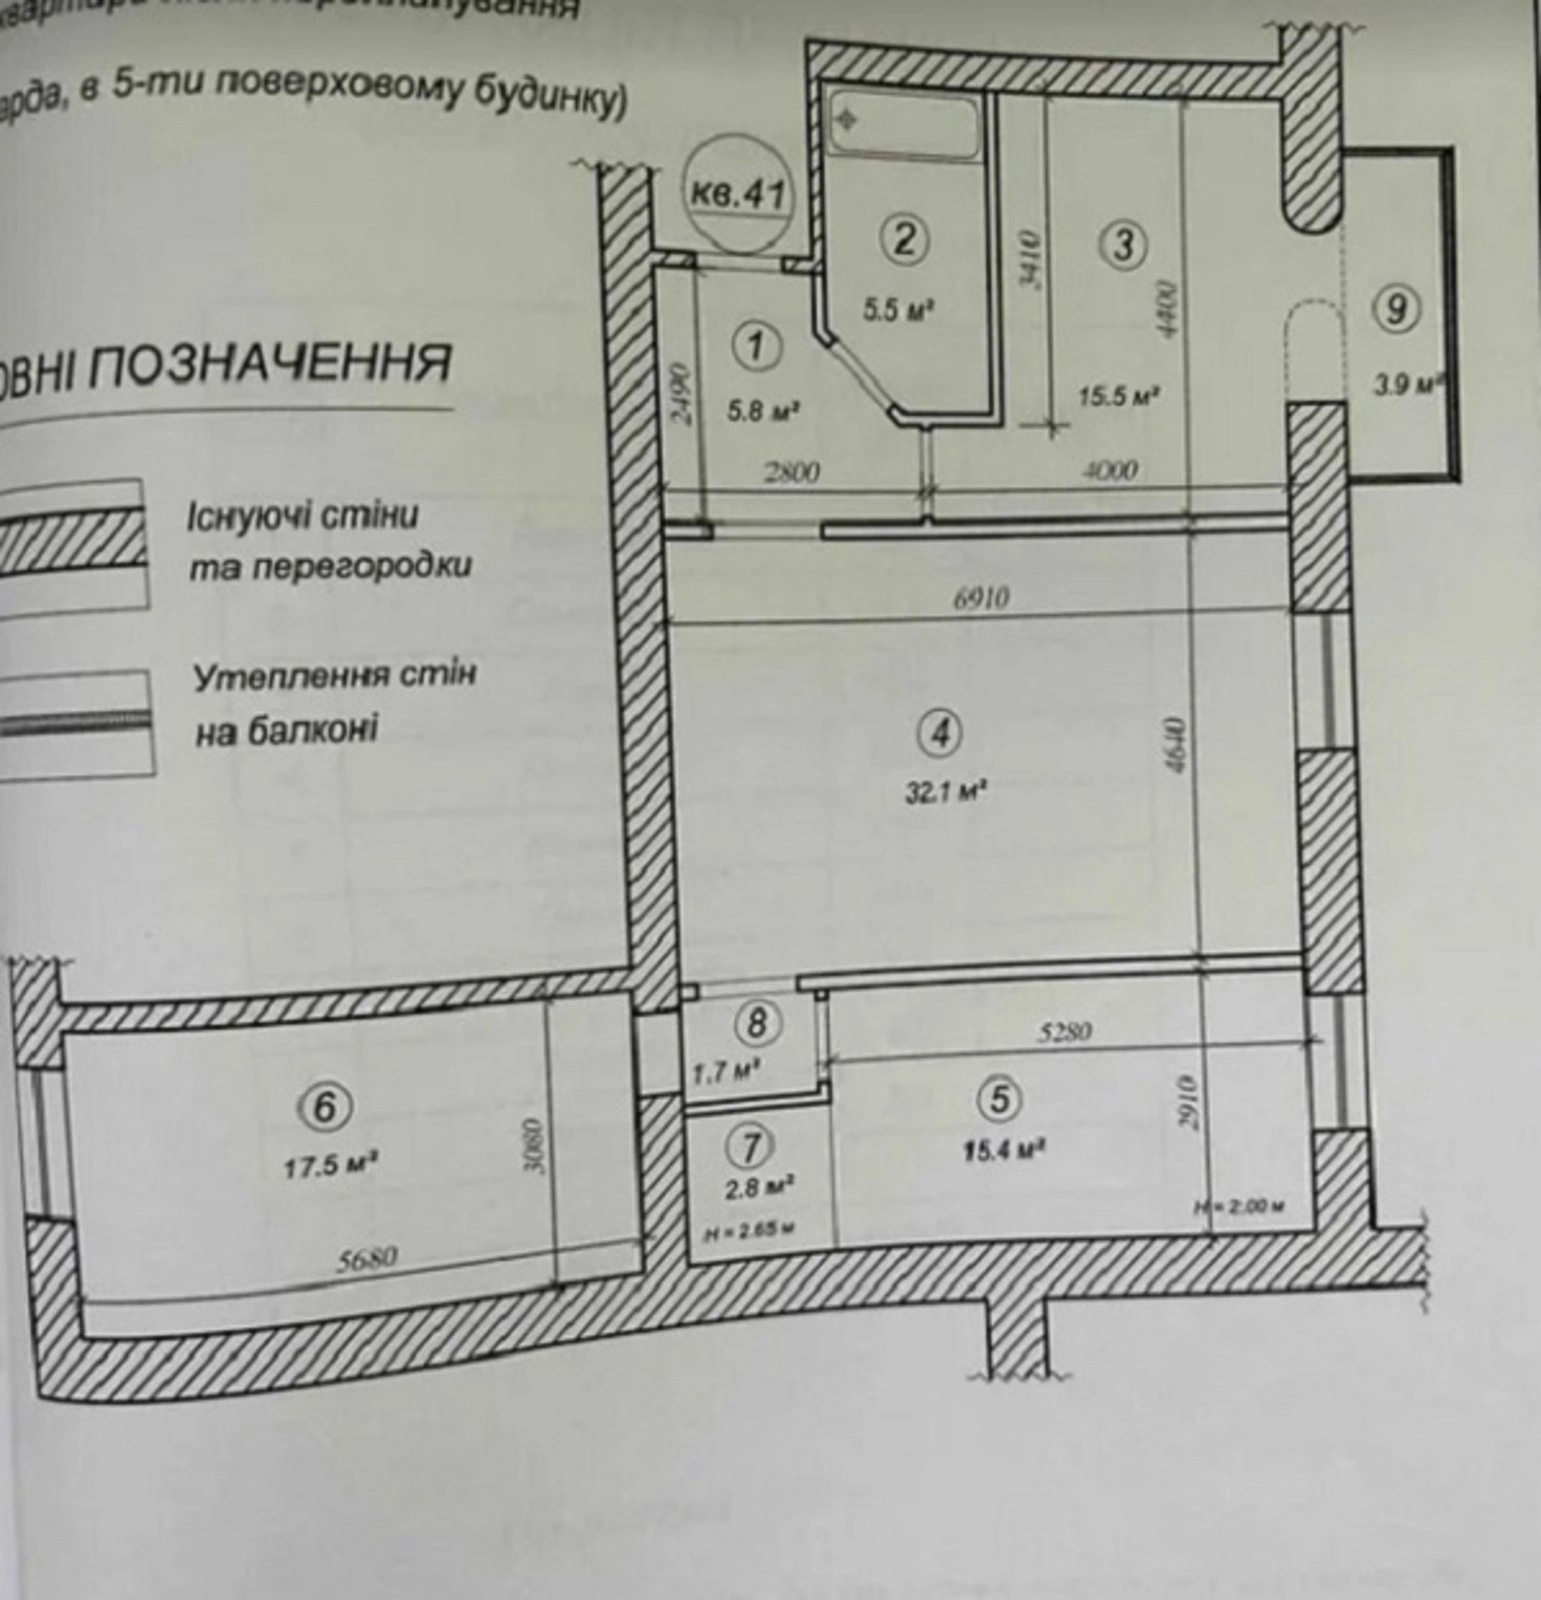 Apartments for sale. 3 rooms, 100 m², 4th floor/4 floors. Vostochnyy, Ternopil. 